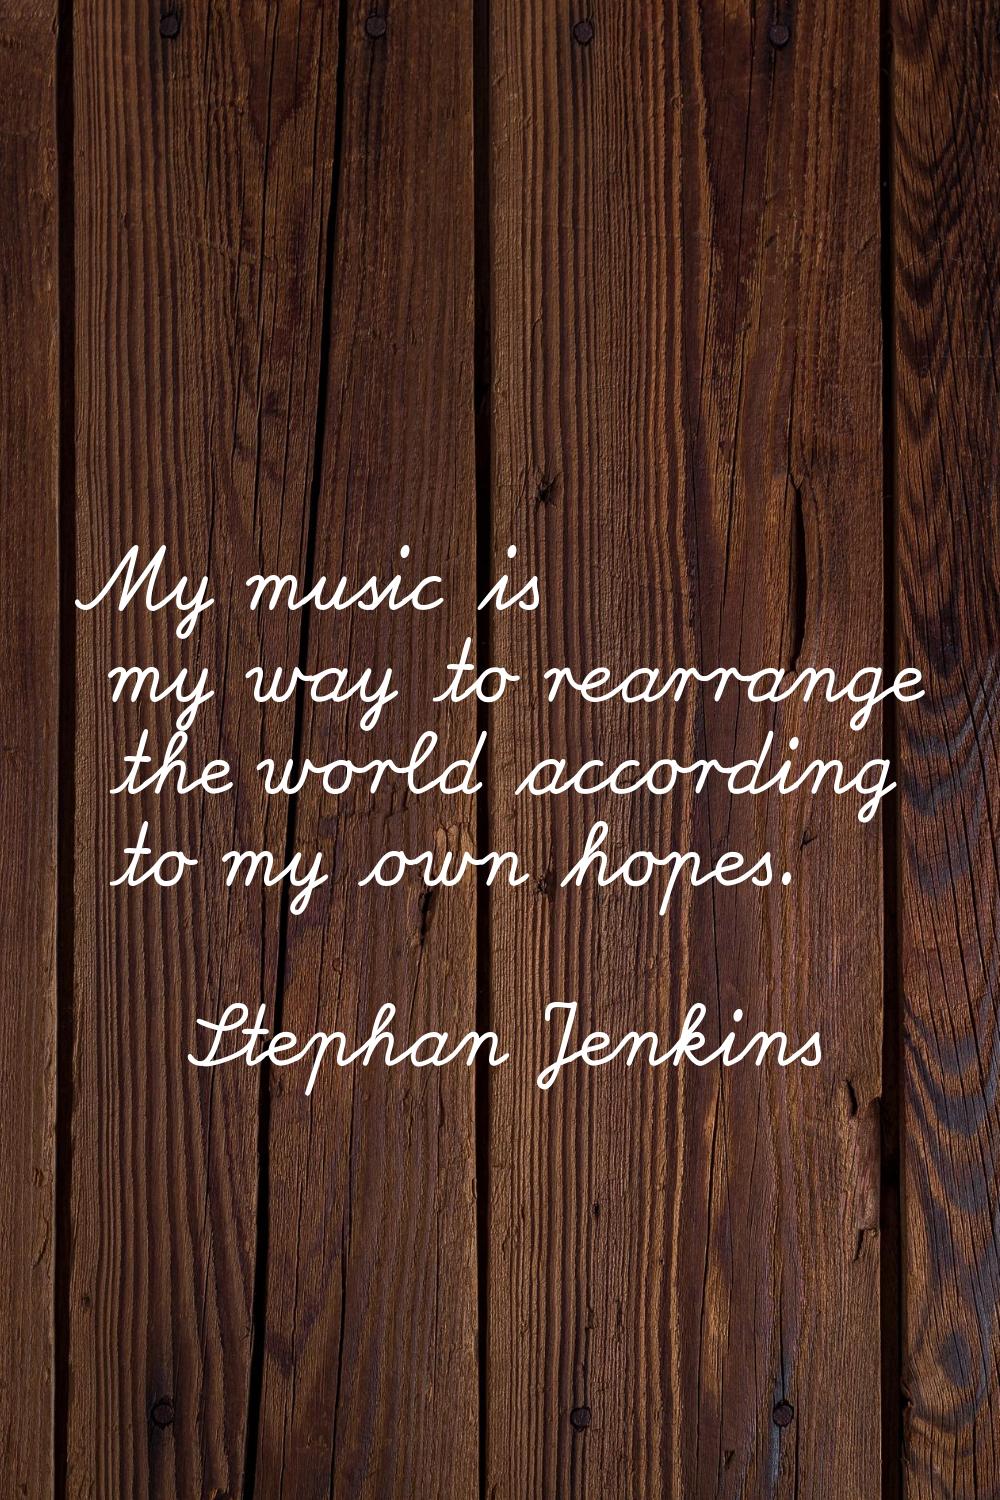 My music is my way to rearrange the world according to my own hopes.